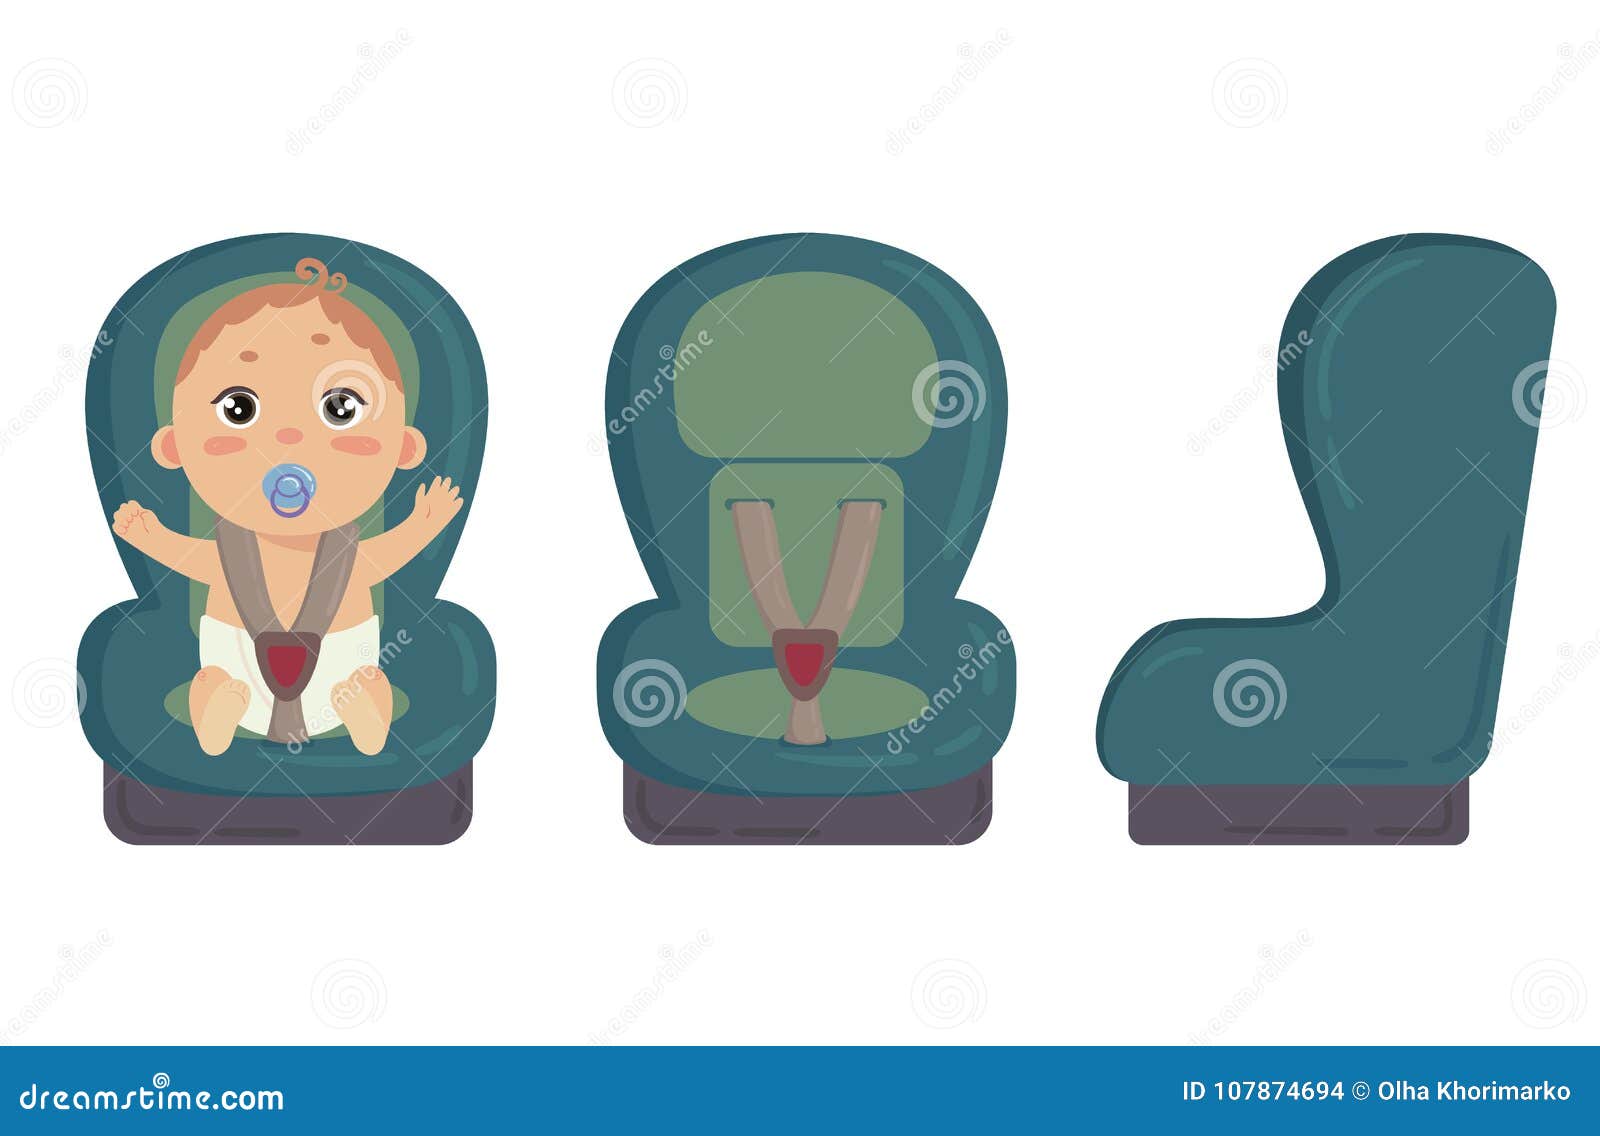 Carseat Cartoons, Illustrations & Vector Stock Images - 348 Pictures to ...